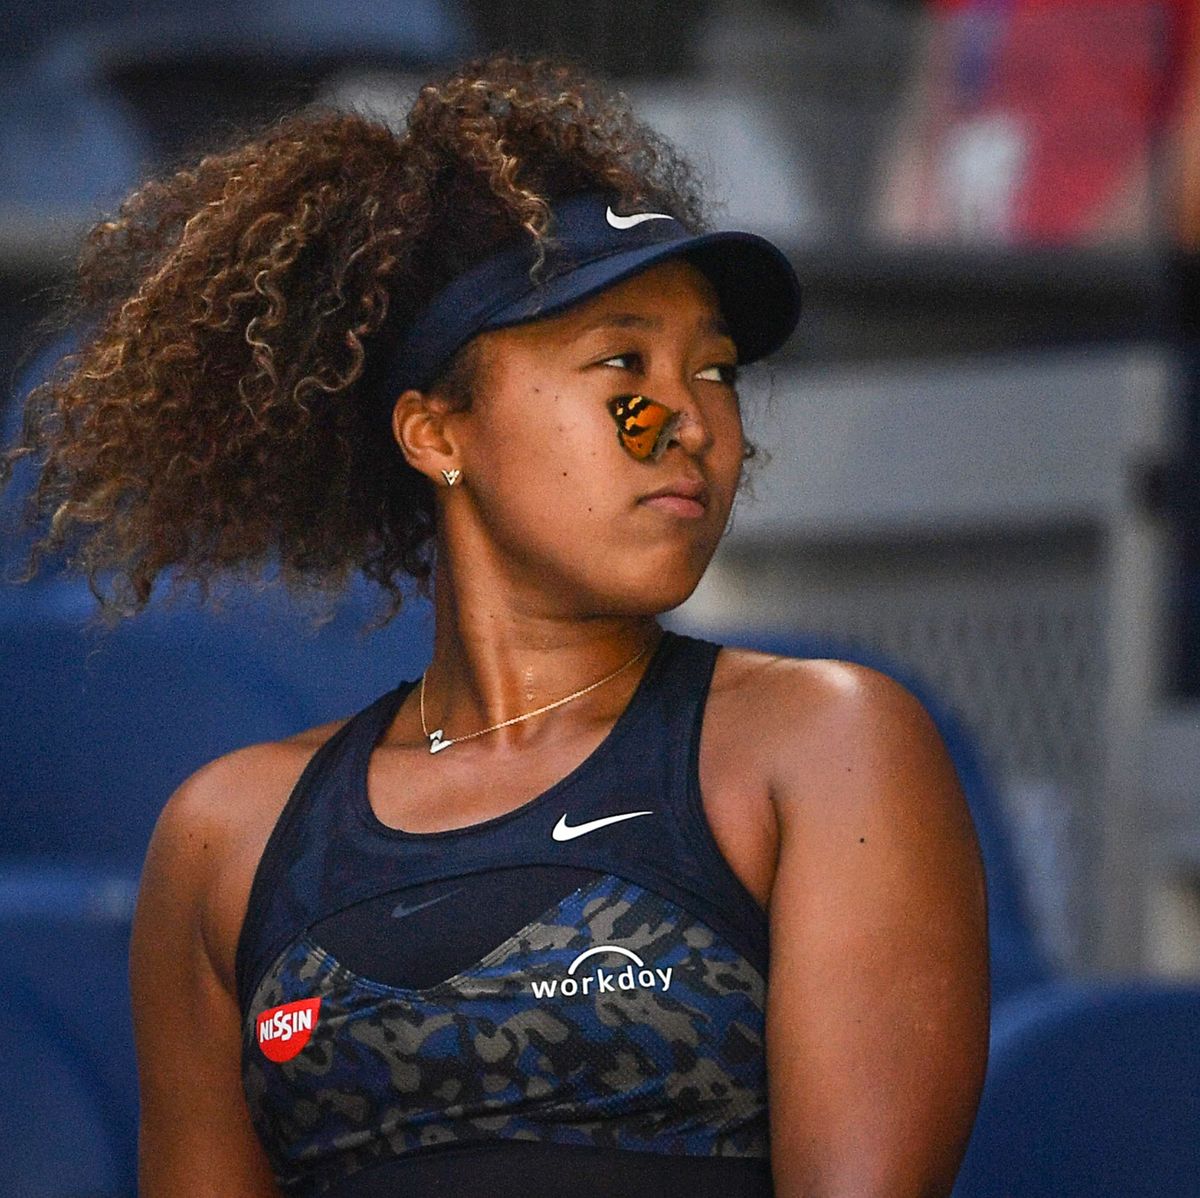 Naomi Osaka charms fans after removing butterfly at the Australian